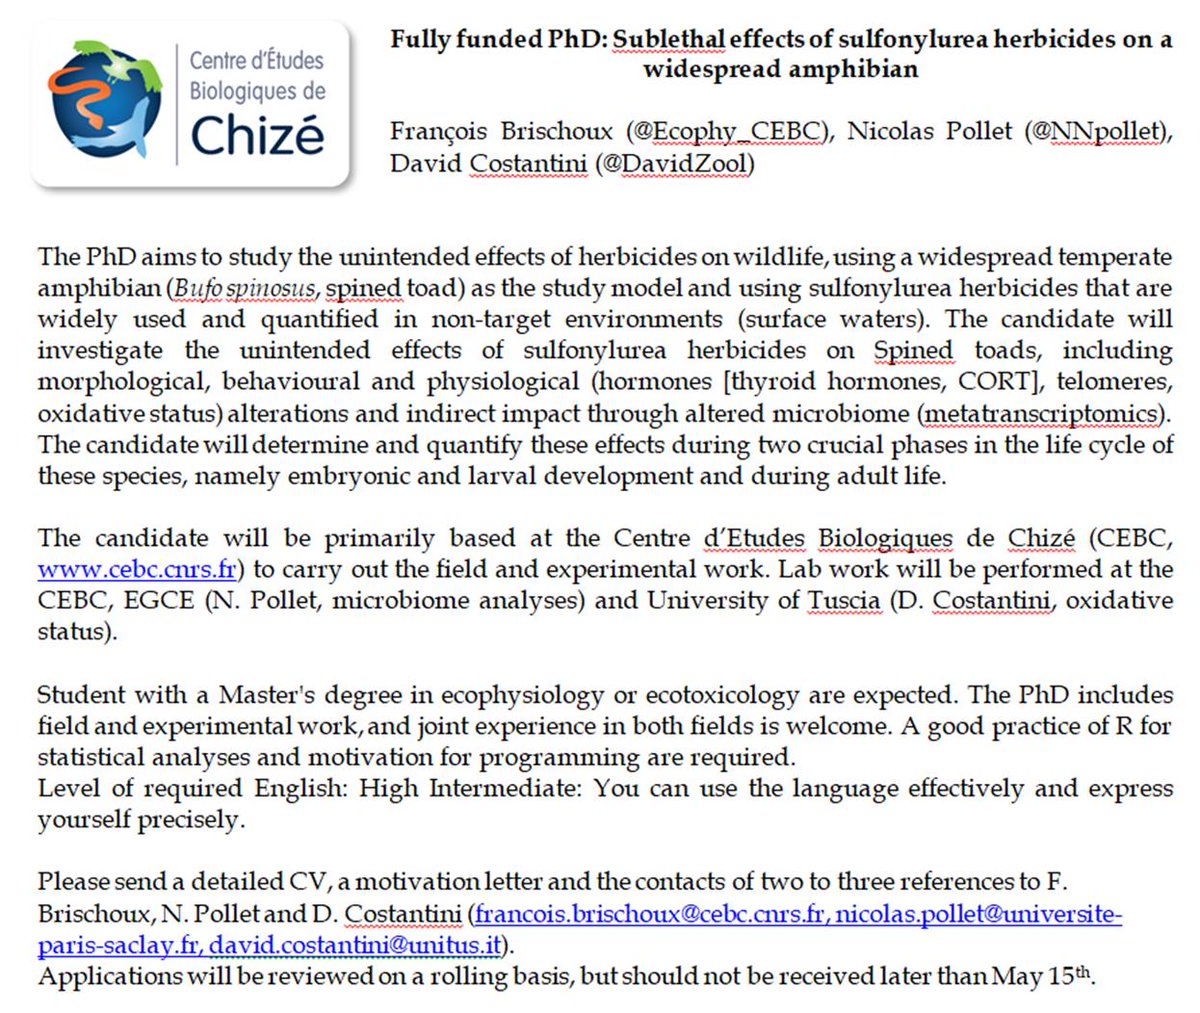 🚨 #PhD 🚨 Fully funded PhD position available to work at @CEBC_ChizeLab on the effects of #herbicides on #amphibians 🐸. Co-supervised by @NNpollet and @DavidZool 🤩. Send an e-mail to François Brischoux for inquiries. Please RT